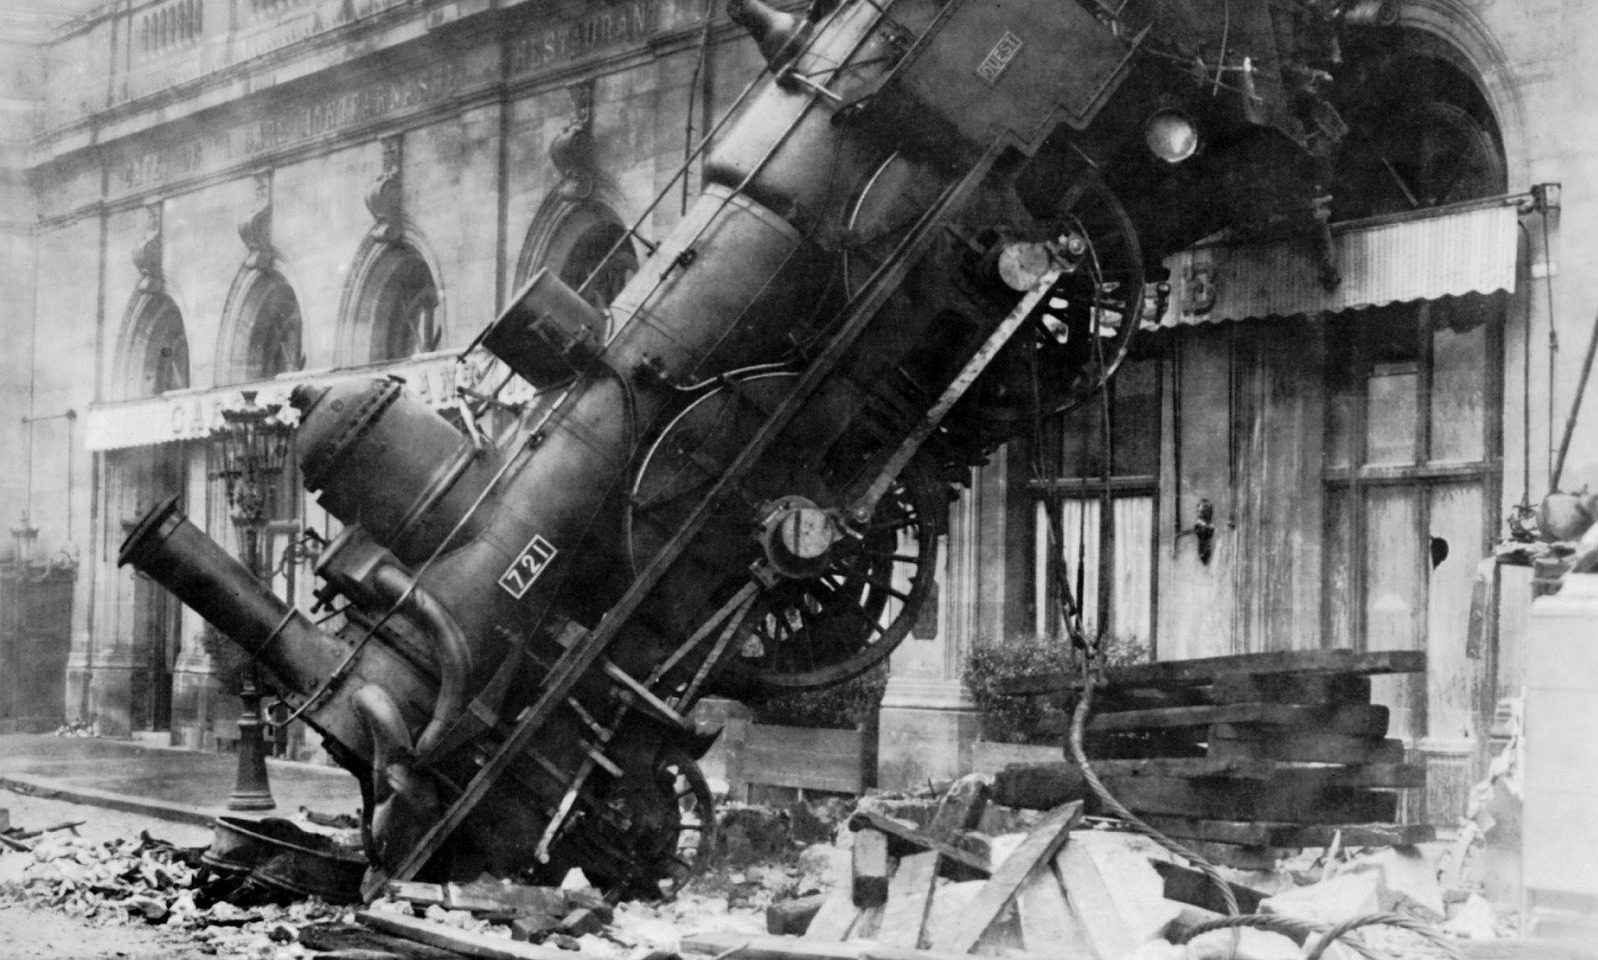 General 1598x960 photography monochrome steam locomotive wreck accidents old photos street building Paris France disaster bricks train station vehicle numbers